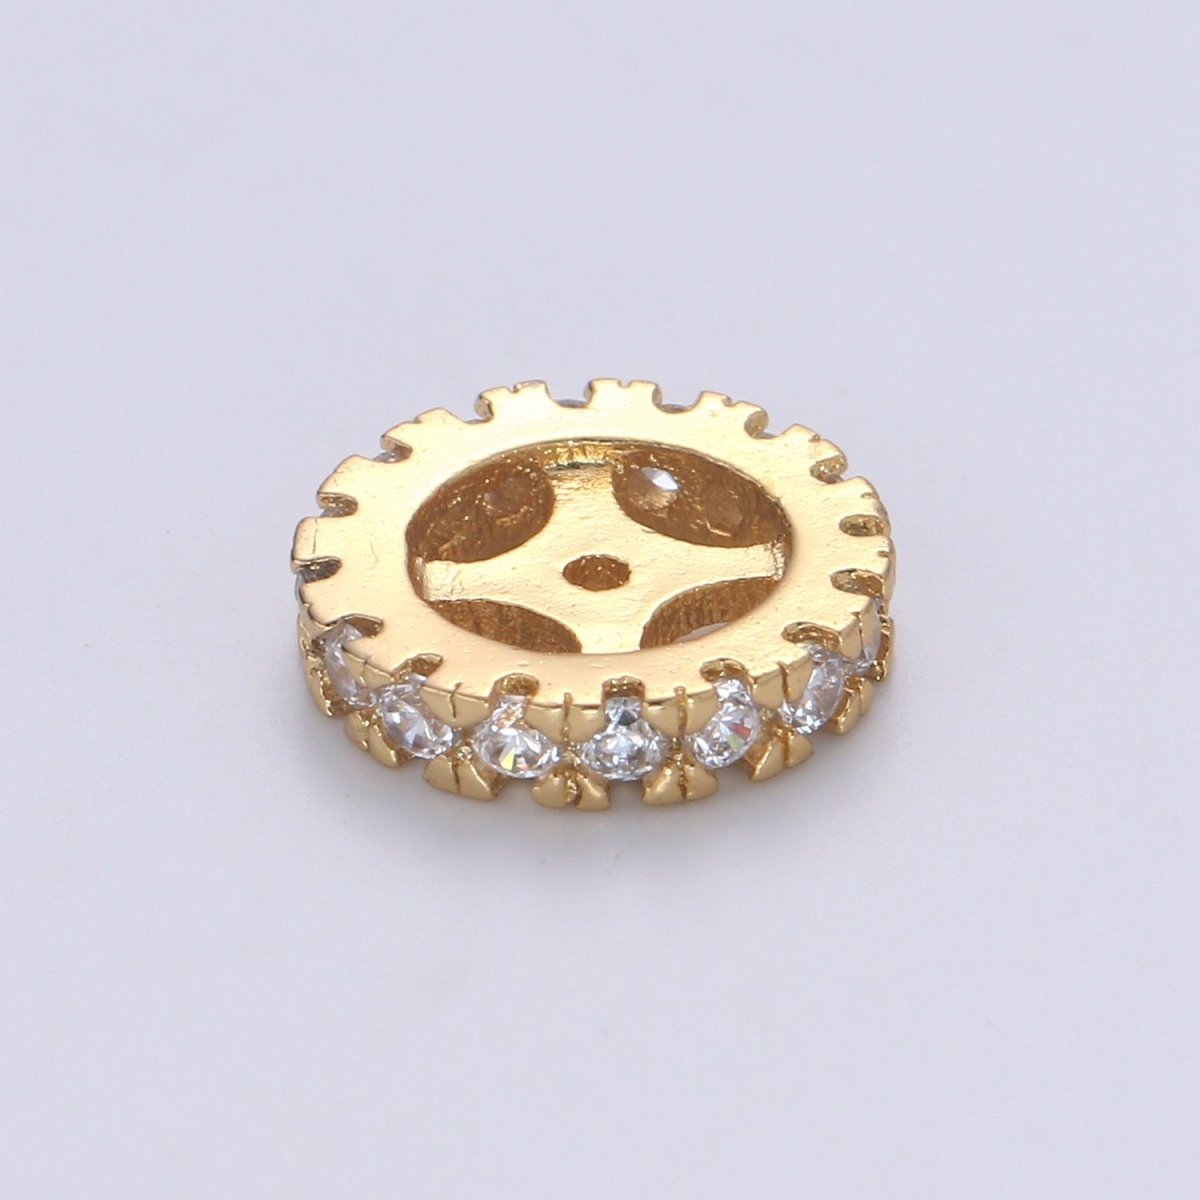 Cubic Zirconia Rondelle - Cz Beads - Crystal Spacers - Gold Rhinestone Spacer Beads Silver Bead Spacer Charm for Necklace Bracelet B-512 B-513 - DLUXCA